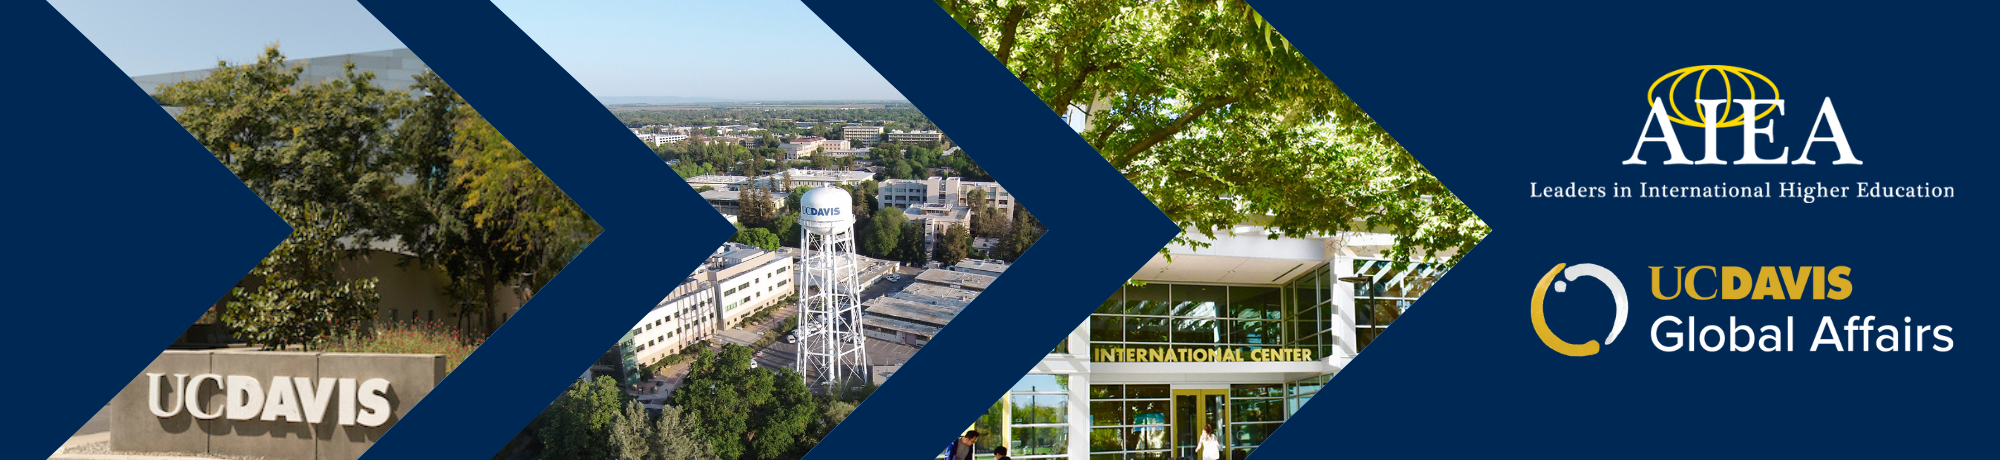 Three photos of UC Davis including eggheads, an overview of the water tower and the UC Davis international center, AIEA logo and UC Davis Global Affairs logo